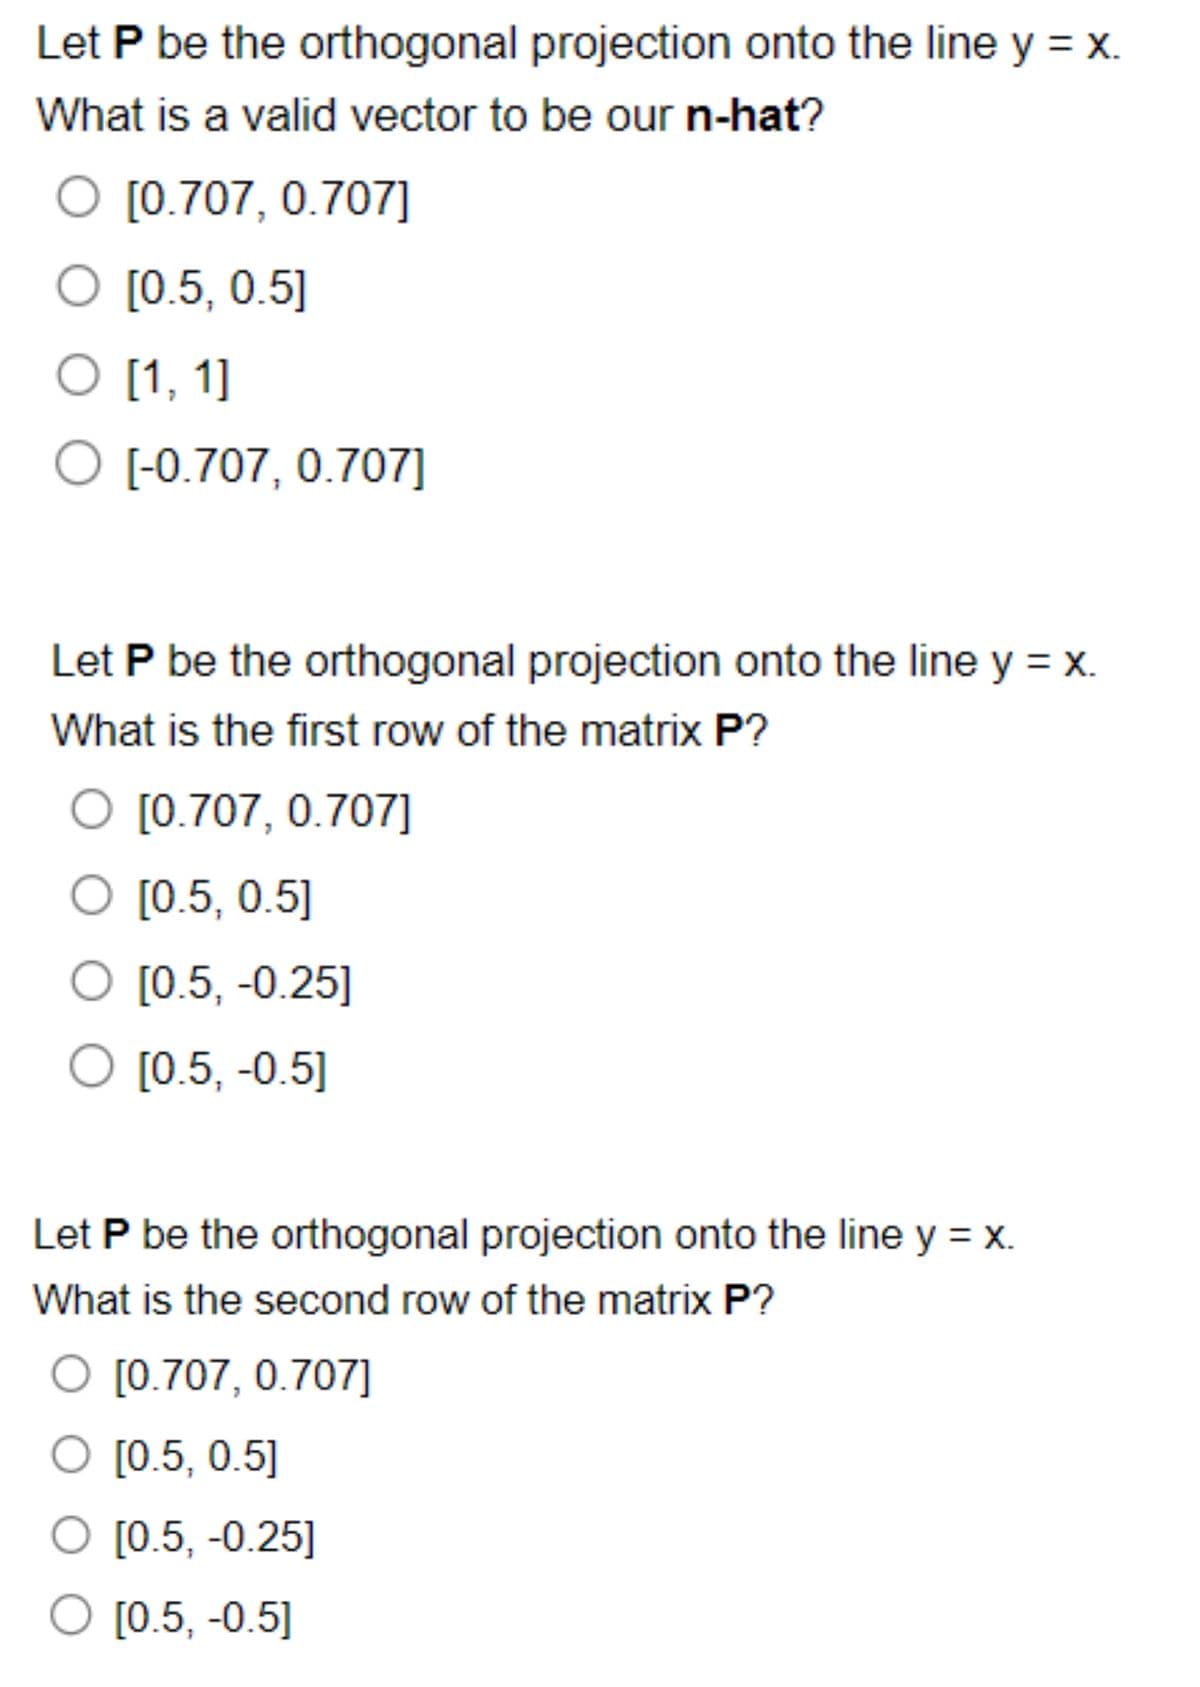 Let P be the orthogonal projection onto the line y = x.
What is a valid vector to be our n-hat?
O [0.707, 0.707]
O [0.5, 0.5]
O [1,1]
O [-0.707, 0.707]
Let P be the orthogonal projection onto the line y = x.
What is the first row of the matrix P?
O [0.707, 0.707]
O [0.5, 0.5]
O [0.5, -0.25]
O [0.5, -0.5]
Let P be the orthogonal projection onto the line y = x.
What is the second row of the matrix P?
O [0.707, 0.707]
O [0.5, 0.5]
O [0.5, -0.25]
O [0.5, -0.5]